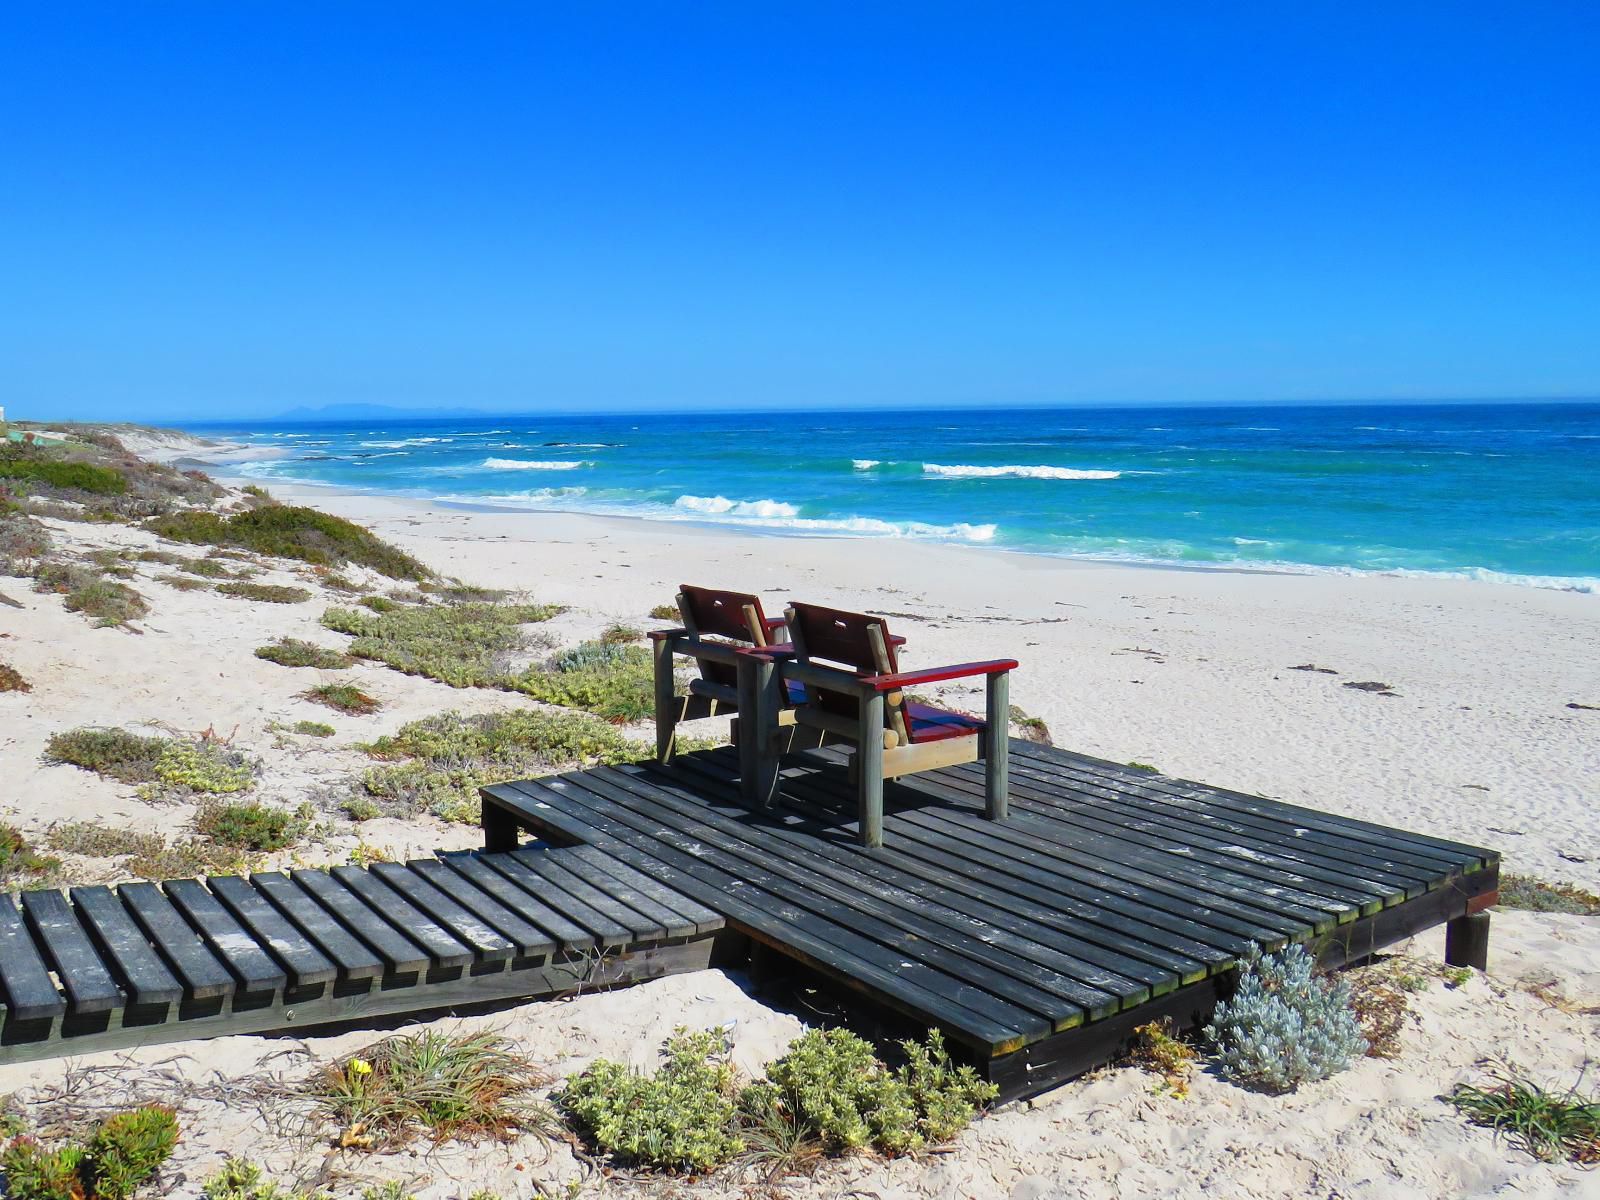 On The Beach Seabreeze Apartment Yzerfontein Western Cape South Africa Beach, Nature, Sand, Ocean, Waters